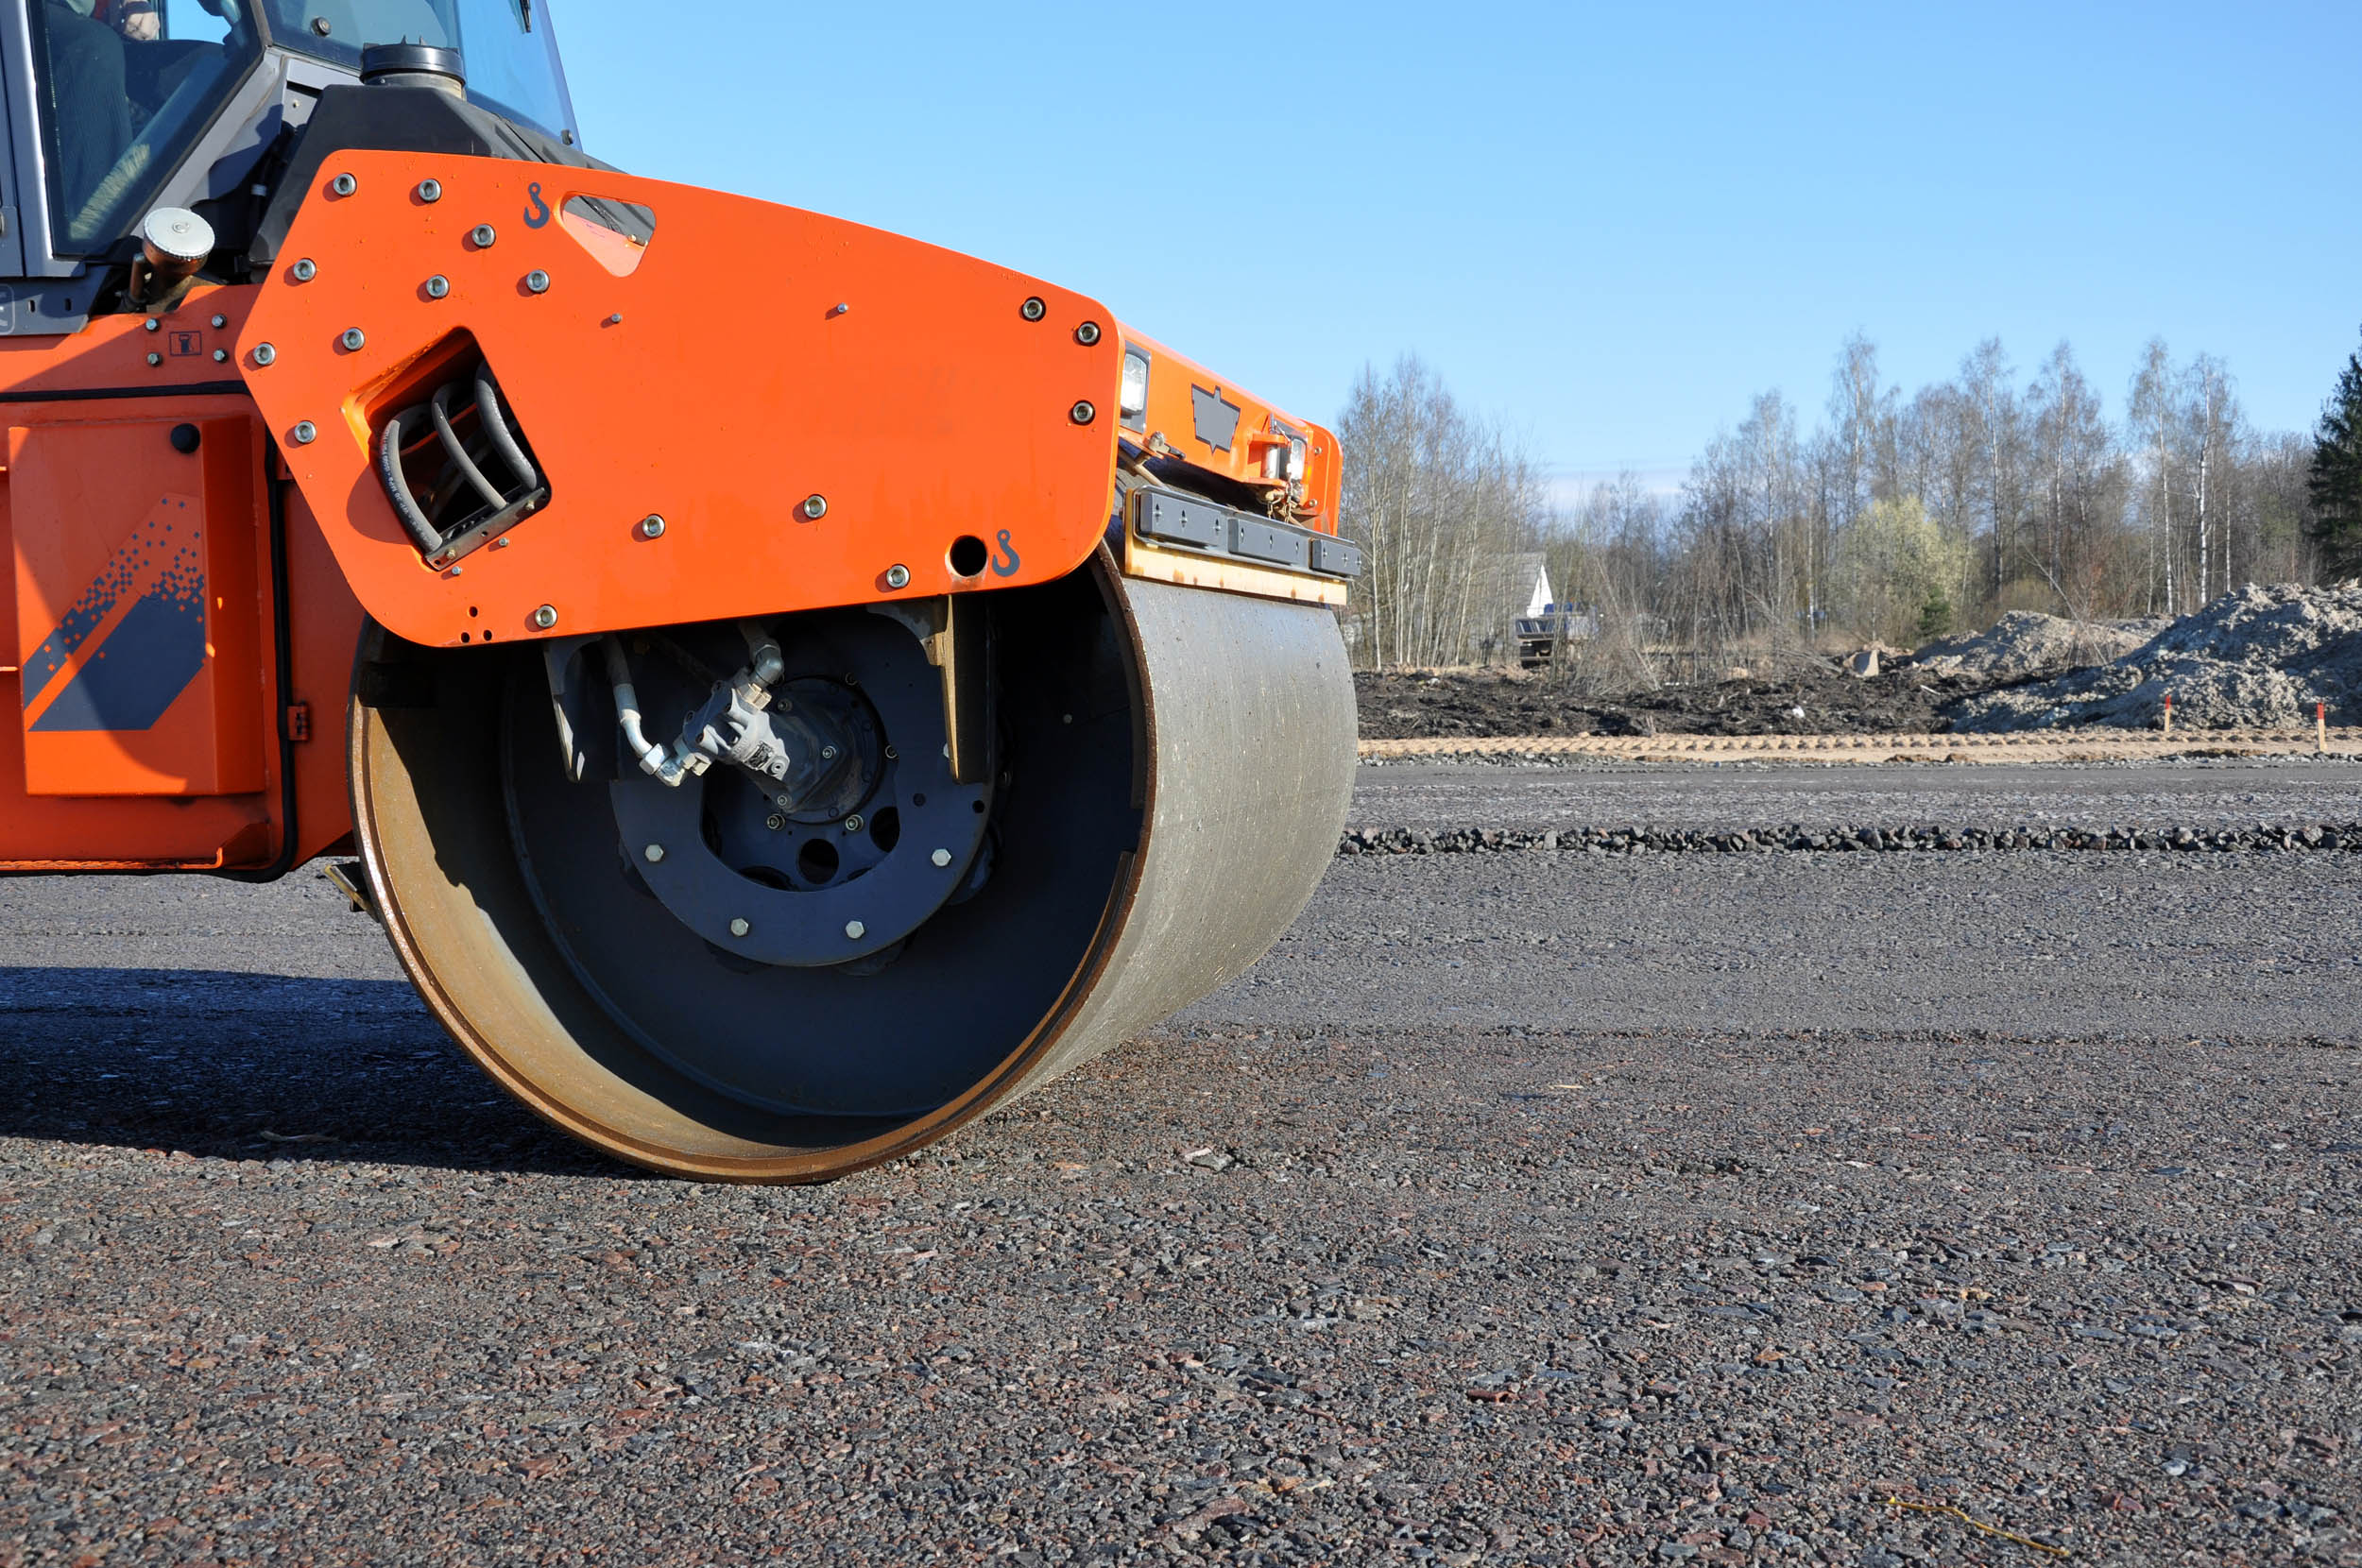 Planned lane closures on I-20 EB & WB for asphalt overlay, in Jefferson County